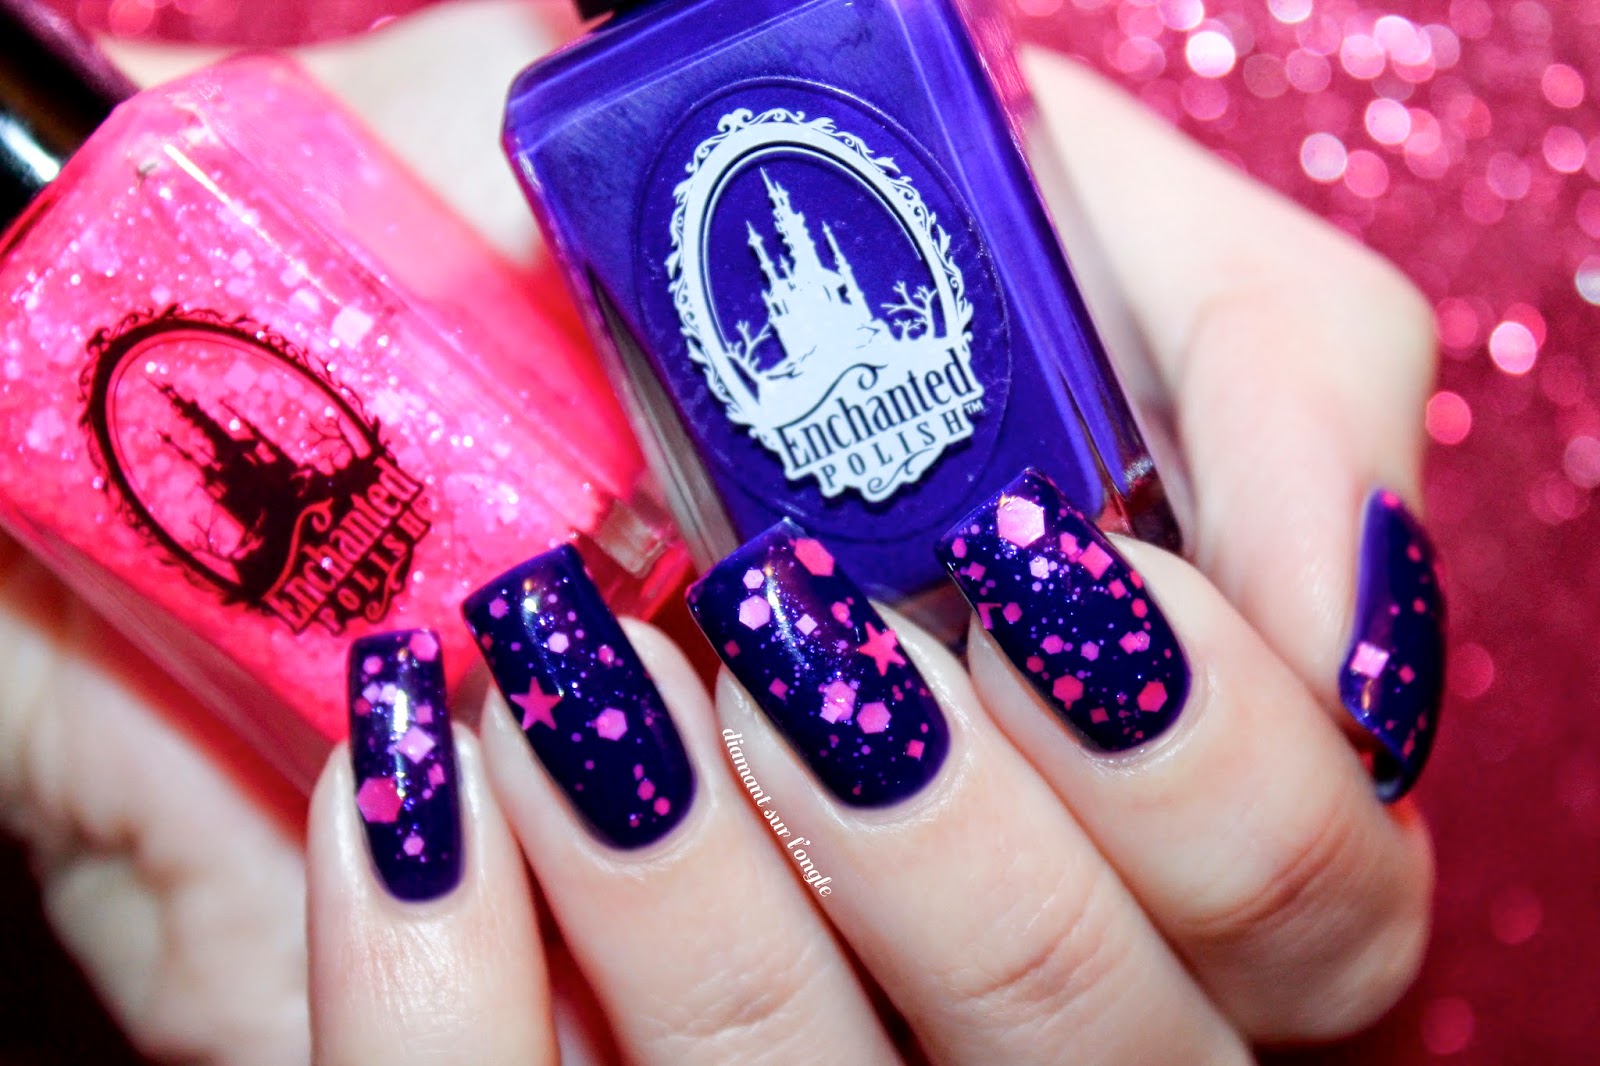 Regal and Life in Plastic, it's Fantastic from Enchanted Polish